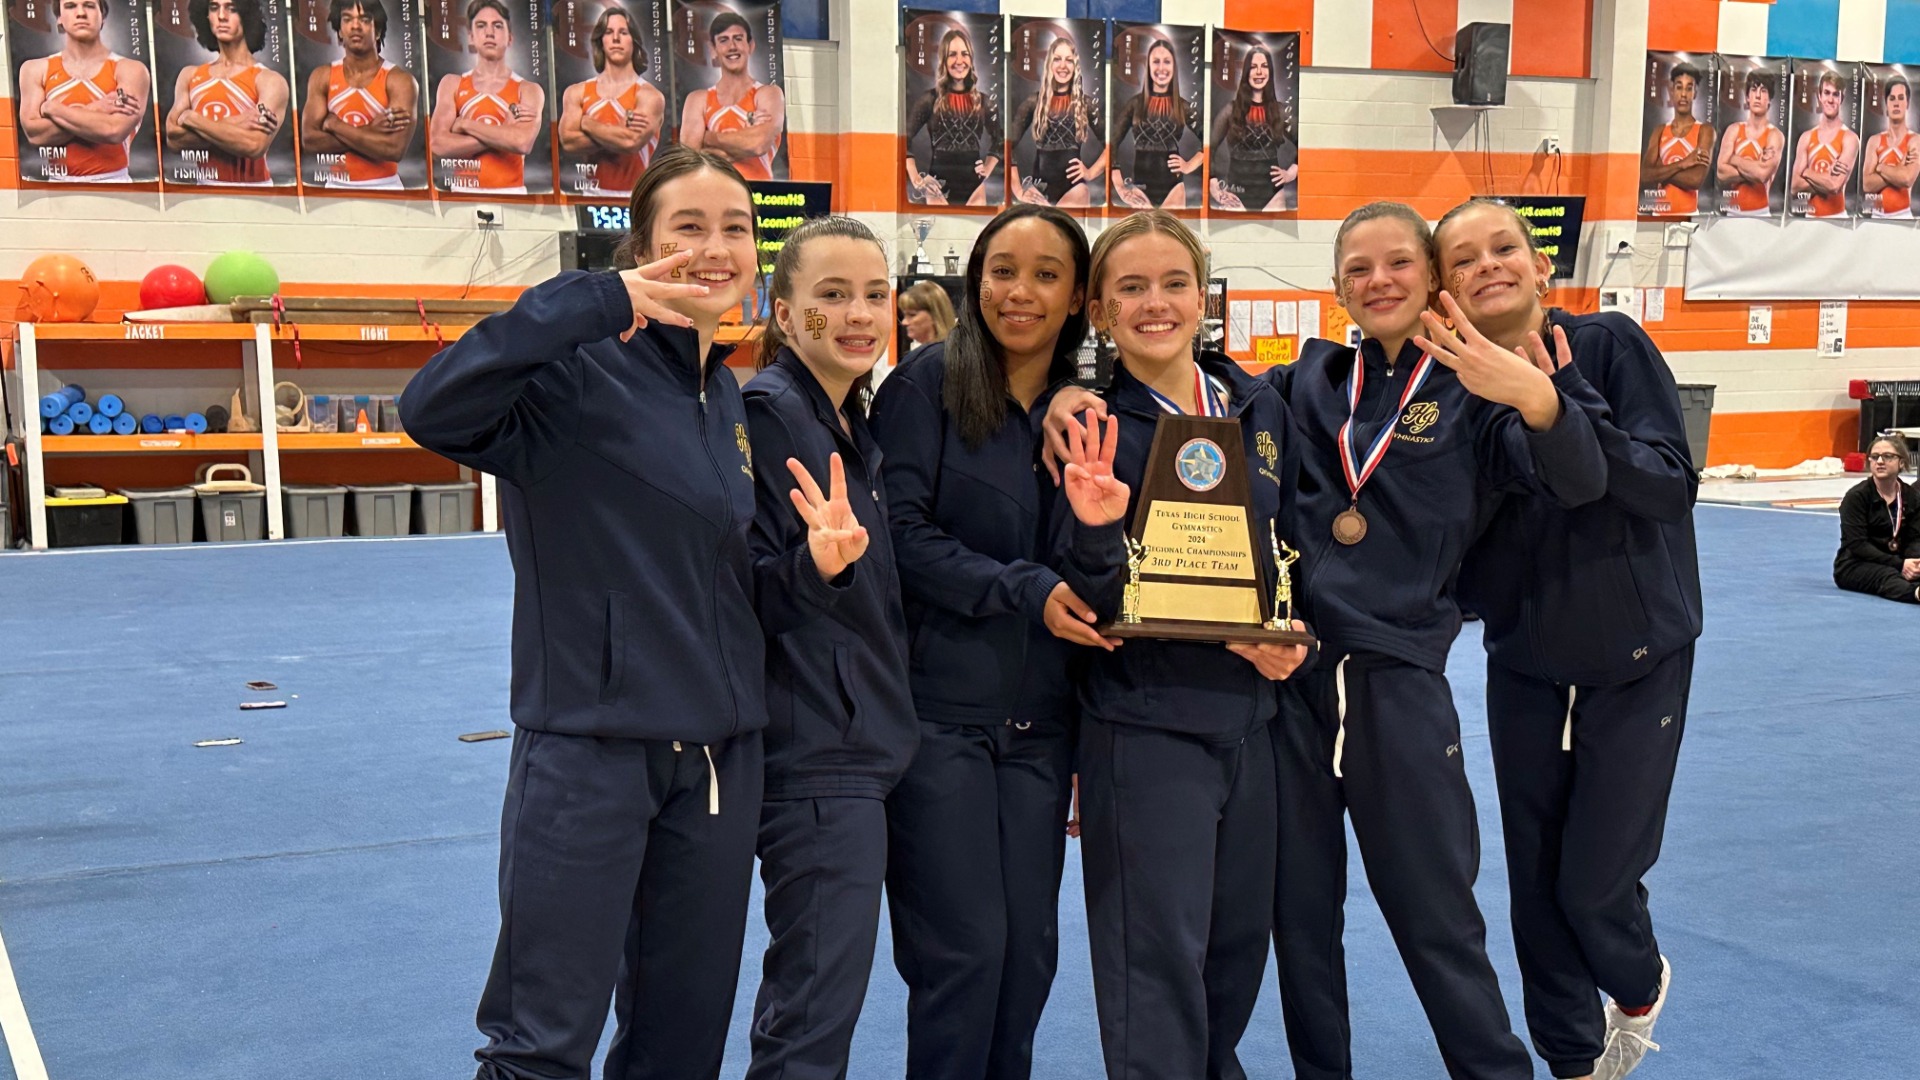 Slide 2 - Lady Scots Gymnastics Team Places 3rd at Regional Championships